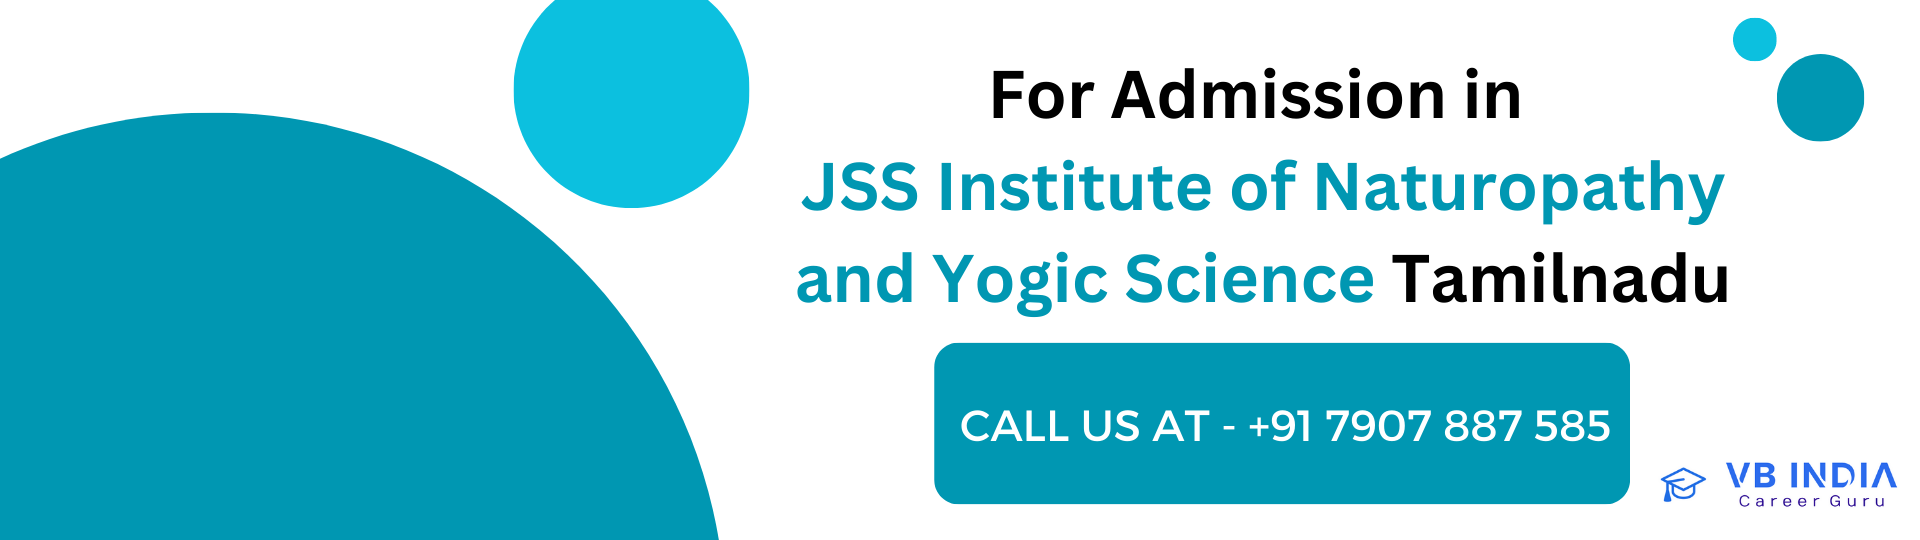 JSS-Institute-of-Naturopathy-and-Yogic-Science